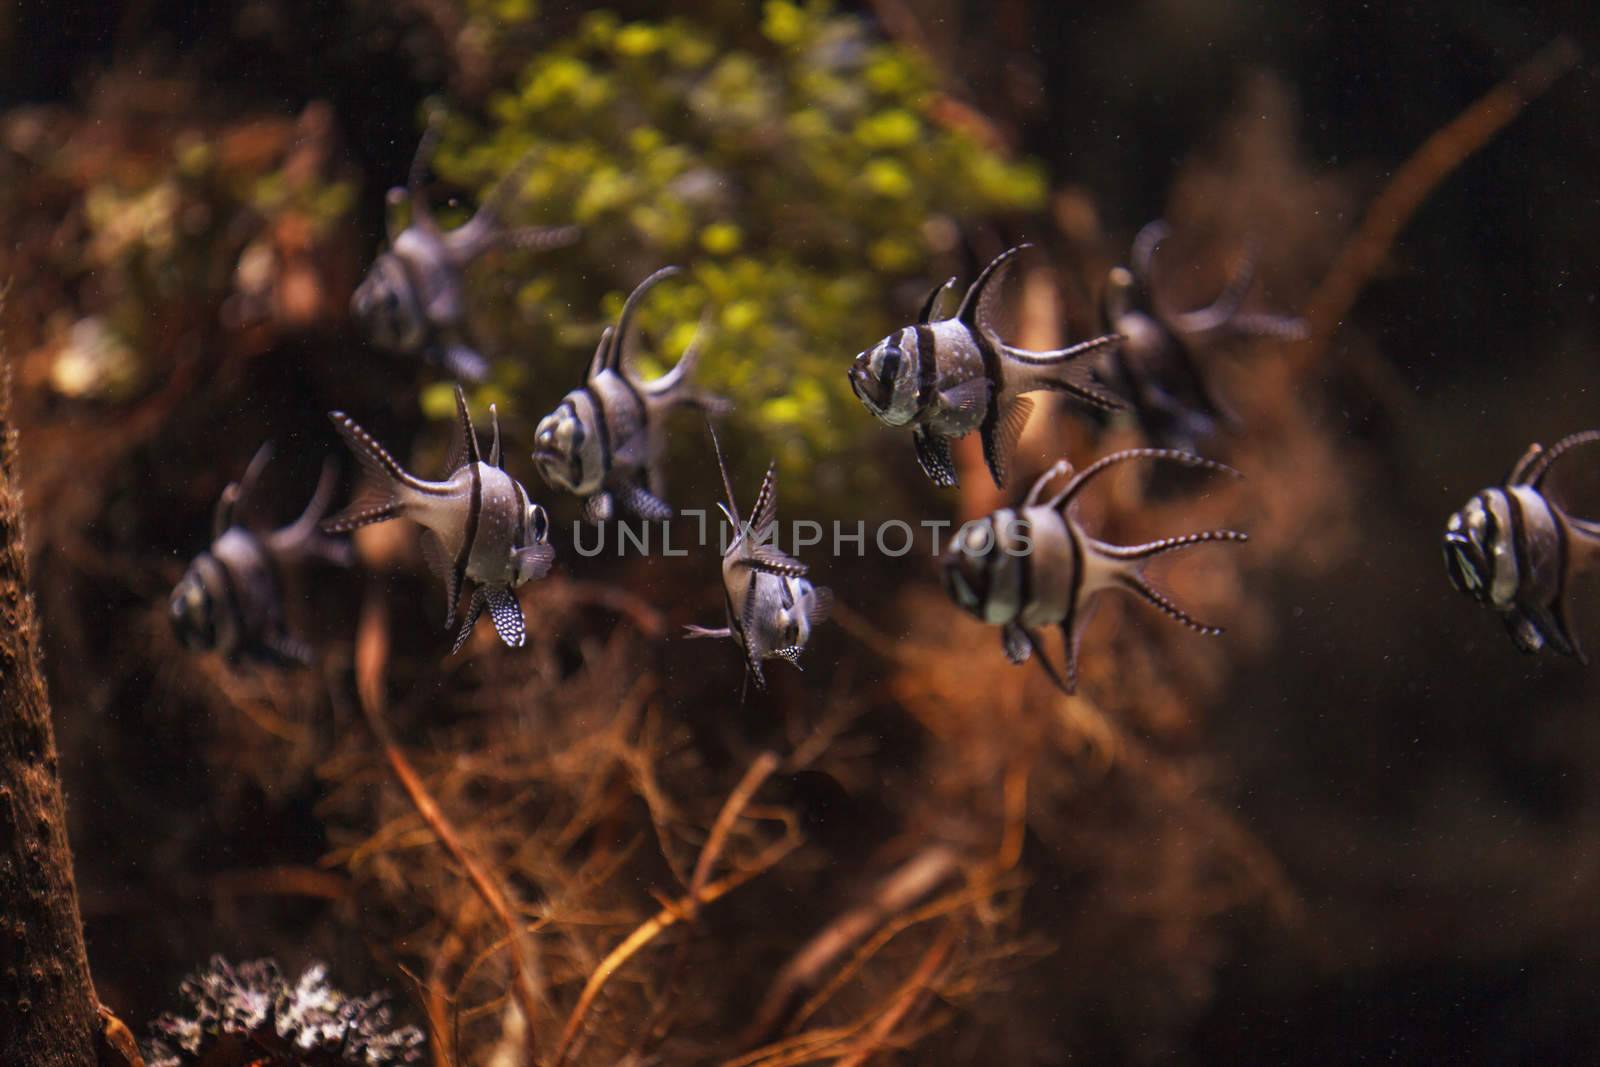 Banggai cardinalfish, Pterapogon kauderni, is a black and white tropical fish found in the Banggai Islands of Indonesia in the mangroves.